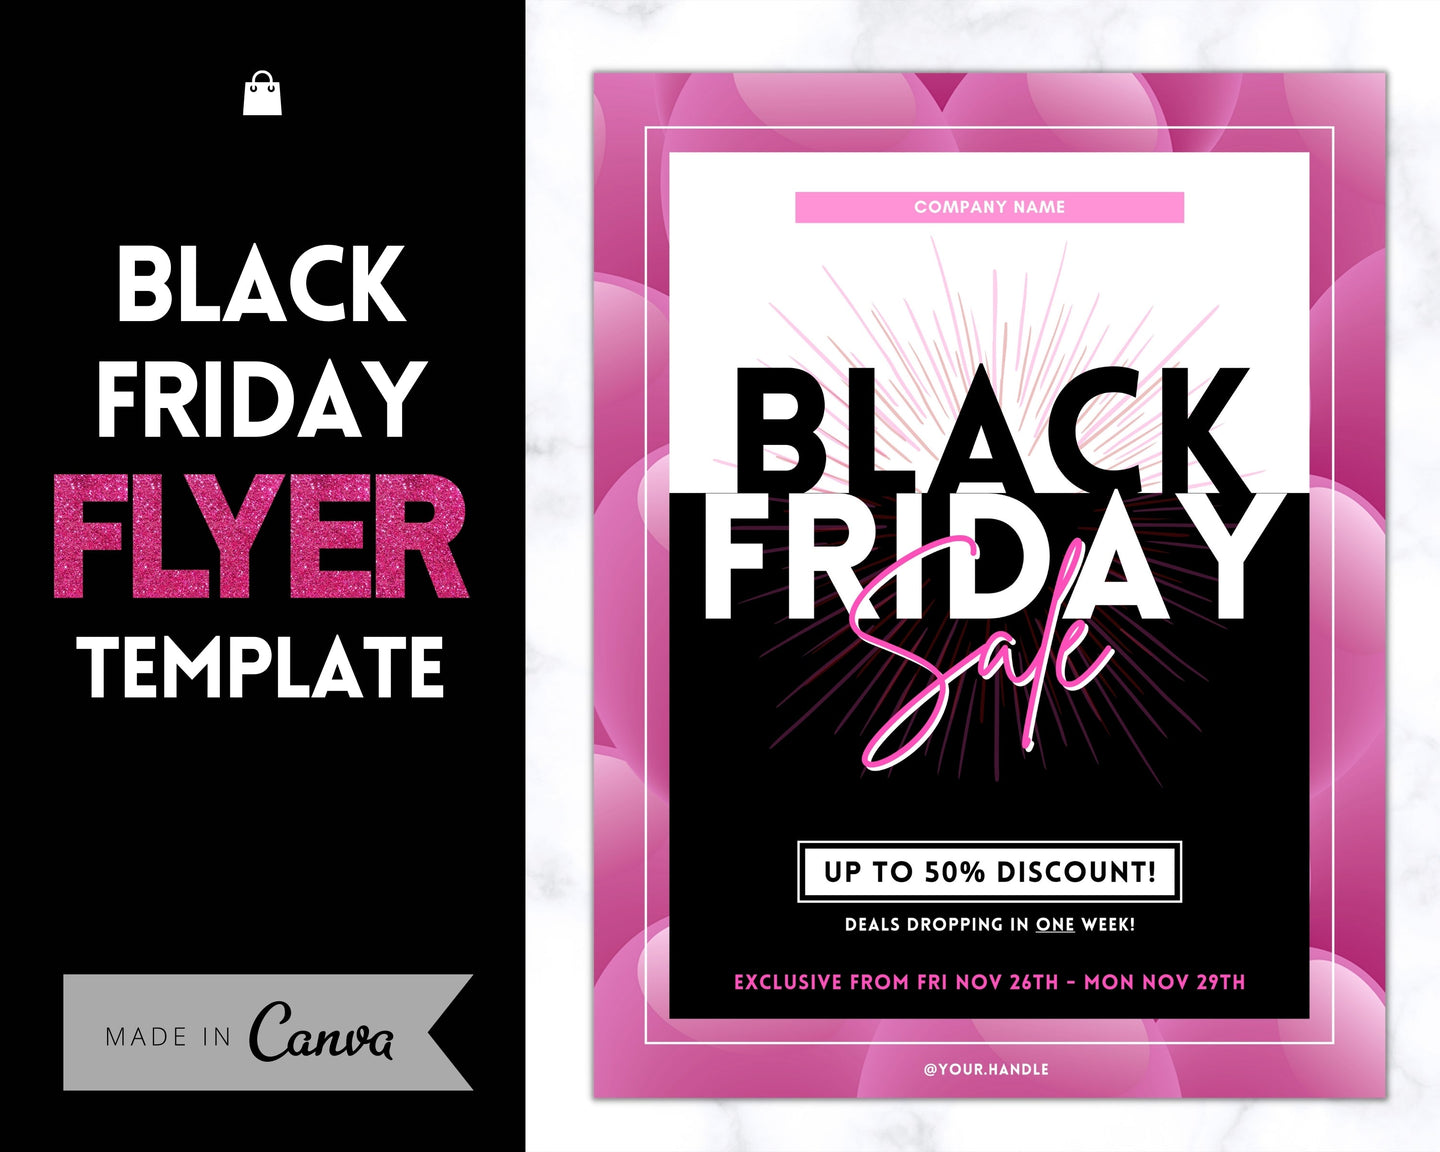 BLACK FRIDAY FLYER Template, Editable Pink Poster, Cyber Monday, Small Business Marketing Branding Template, Christmas Holidays, Flash Sale | Pink